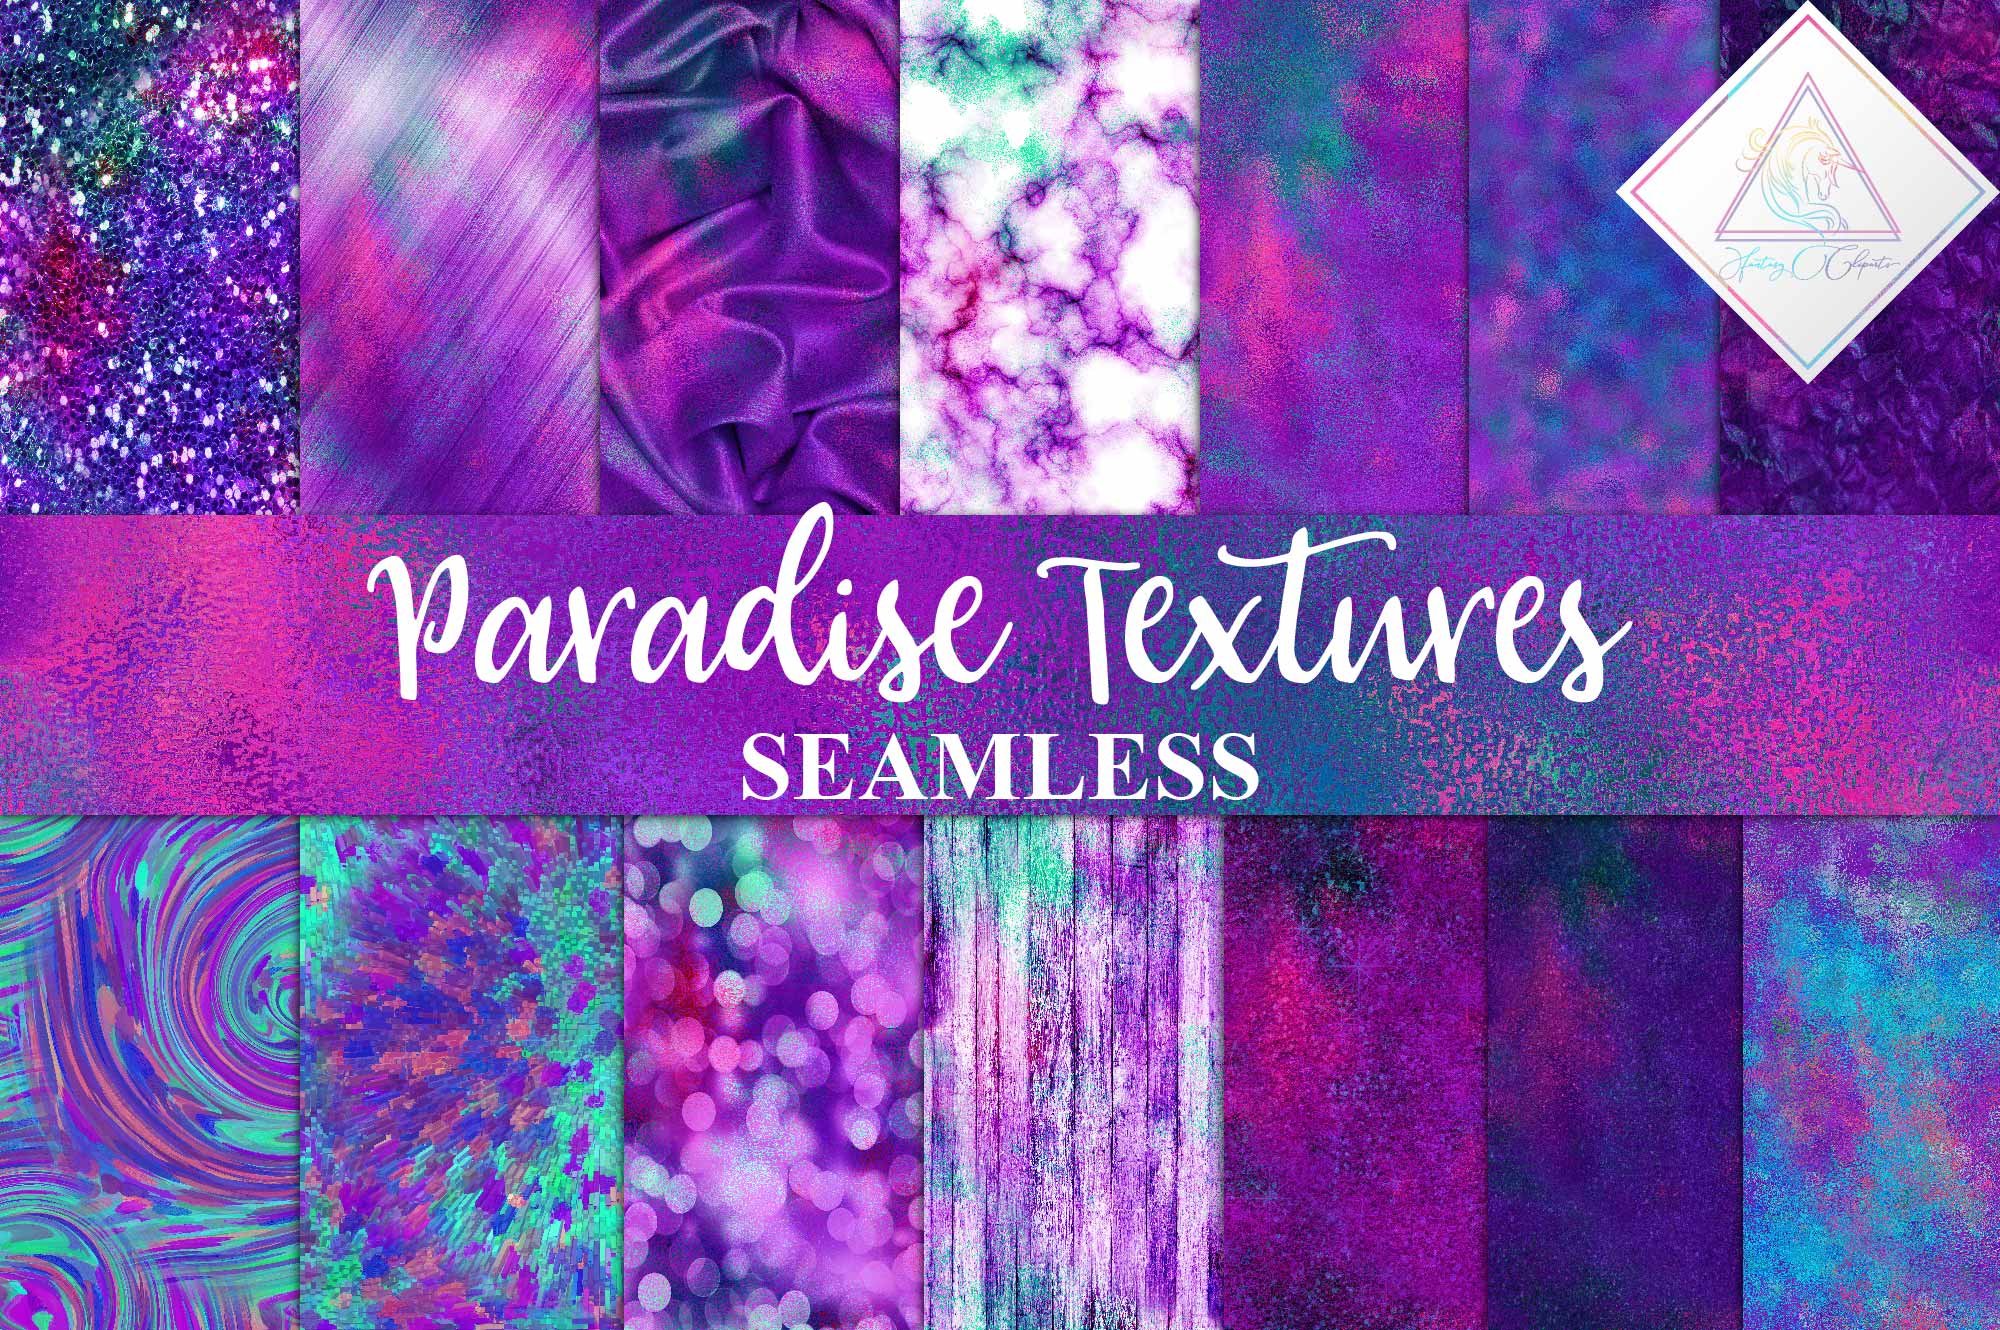 Paradise Textures Digital Paper cover image.